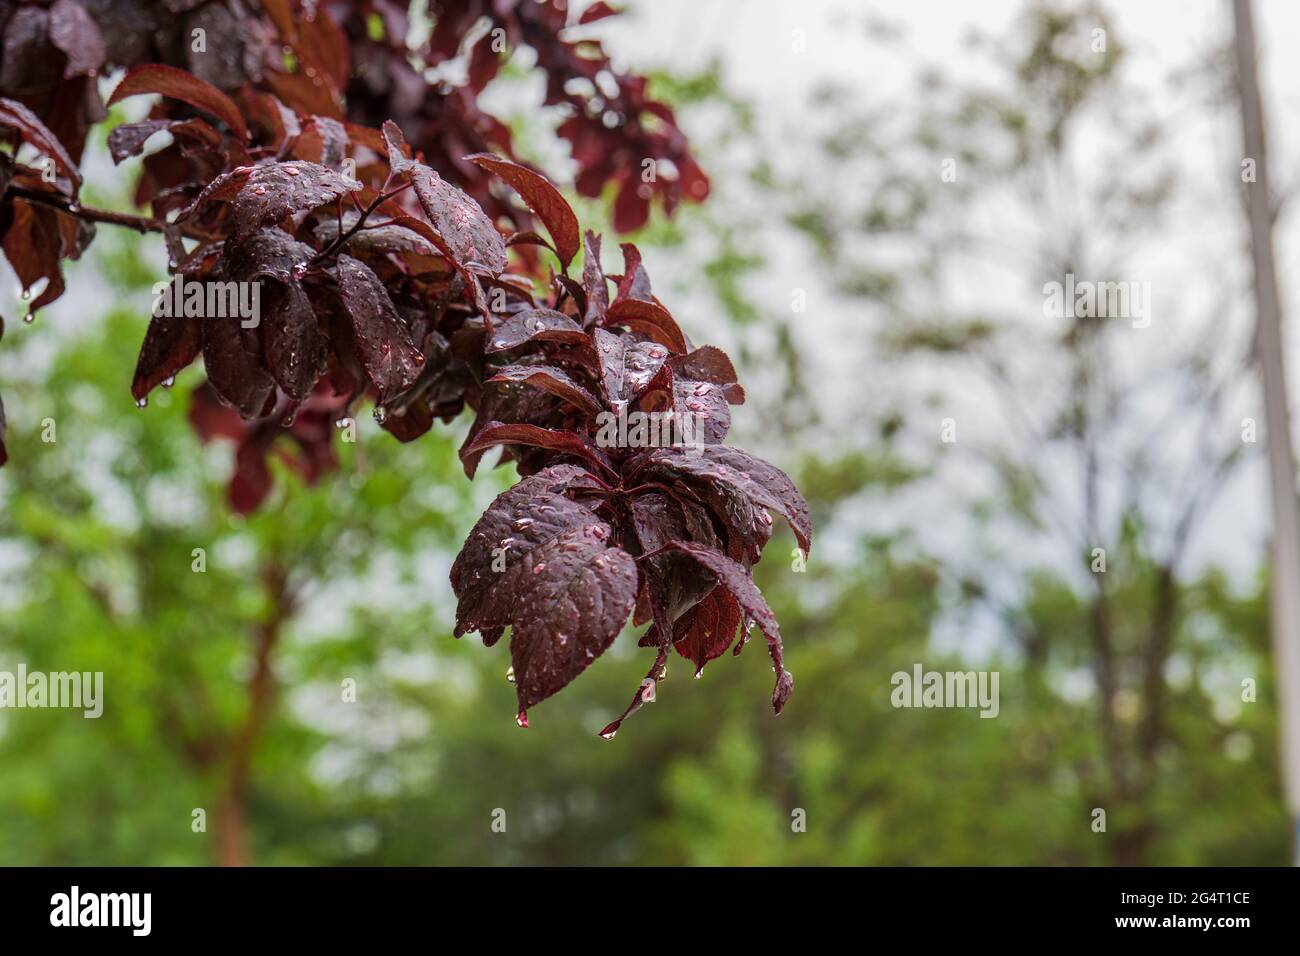 red leaf plum tree and its fruit on the branch. prunus cerasifera.  Selective Focus Fruits. Stock Photo